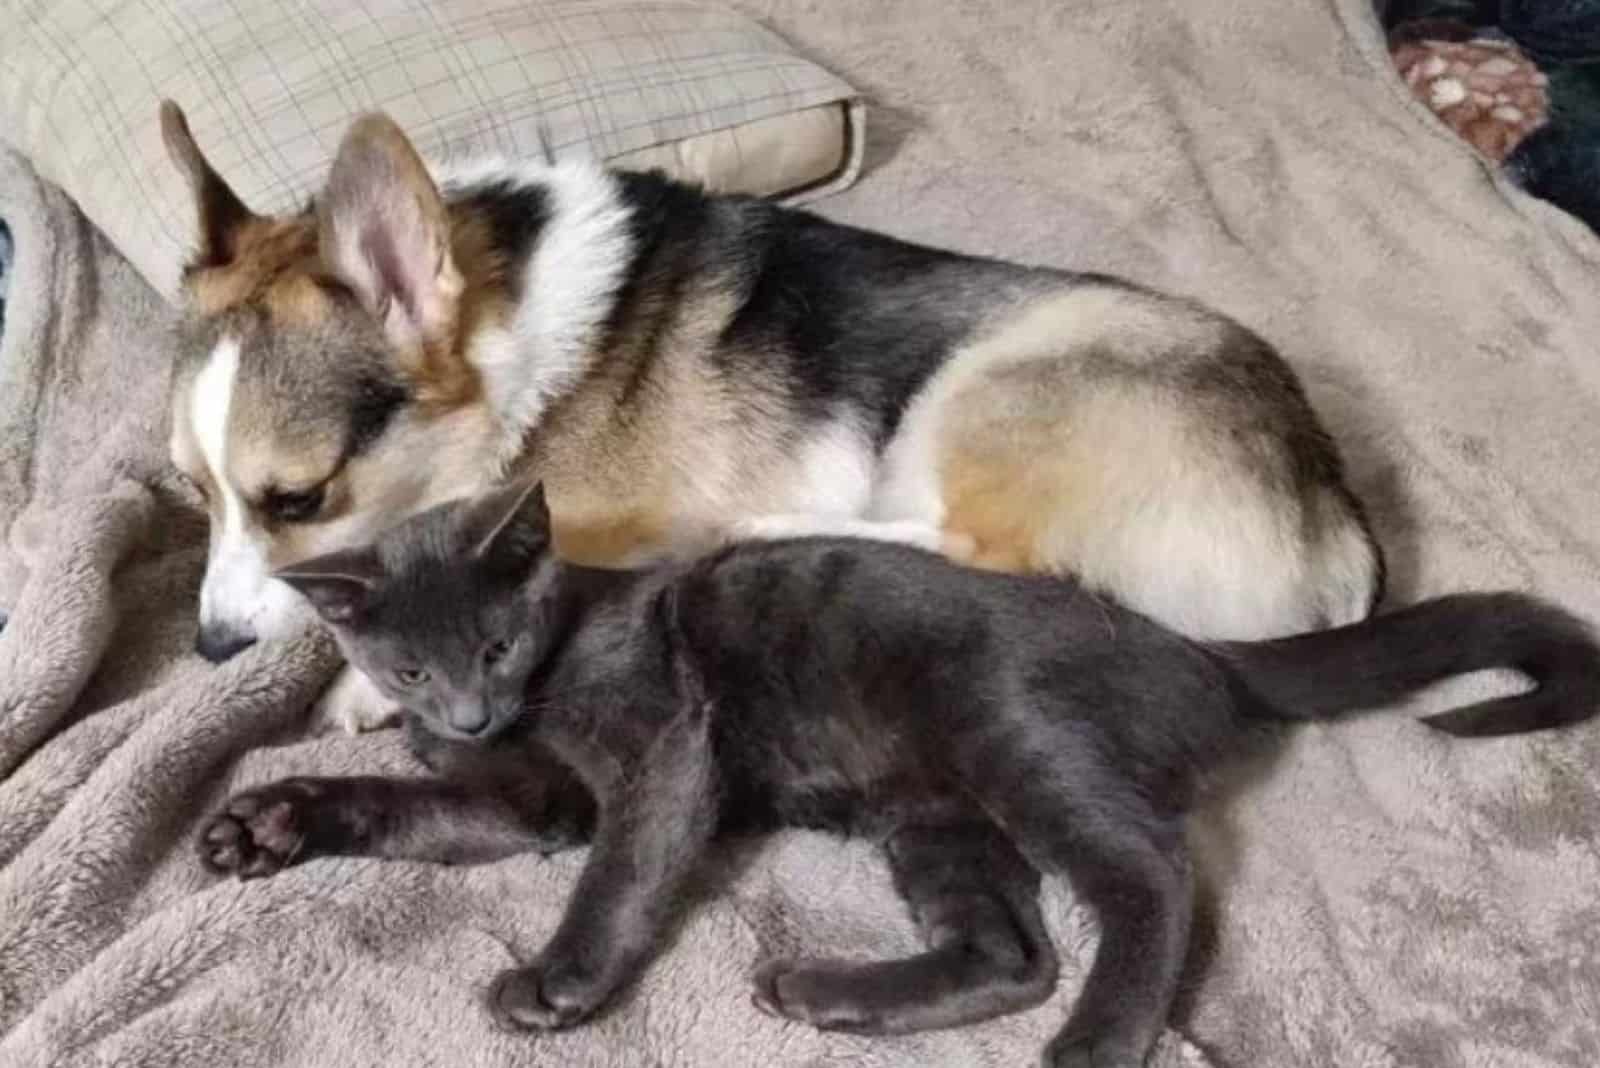 the dog lies next to the cat